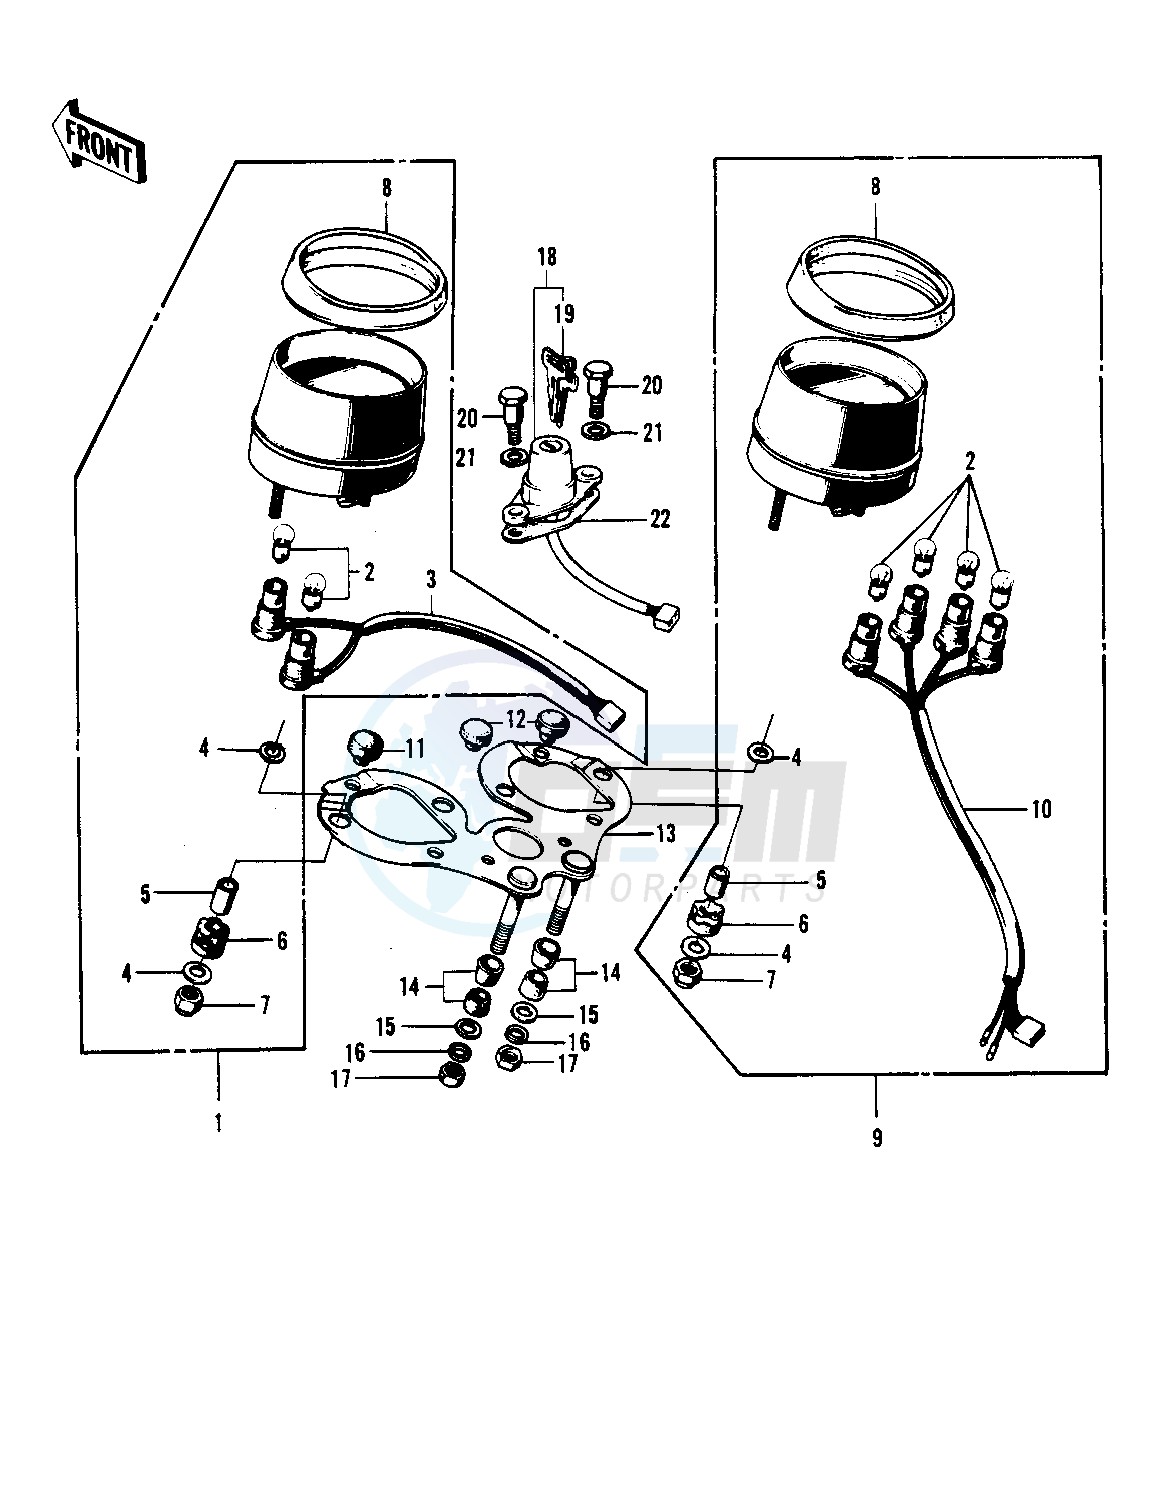 METERS_IGNITION SWITCH image